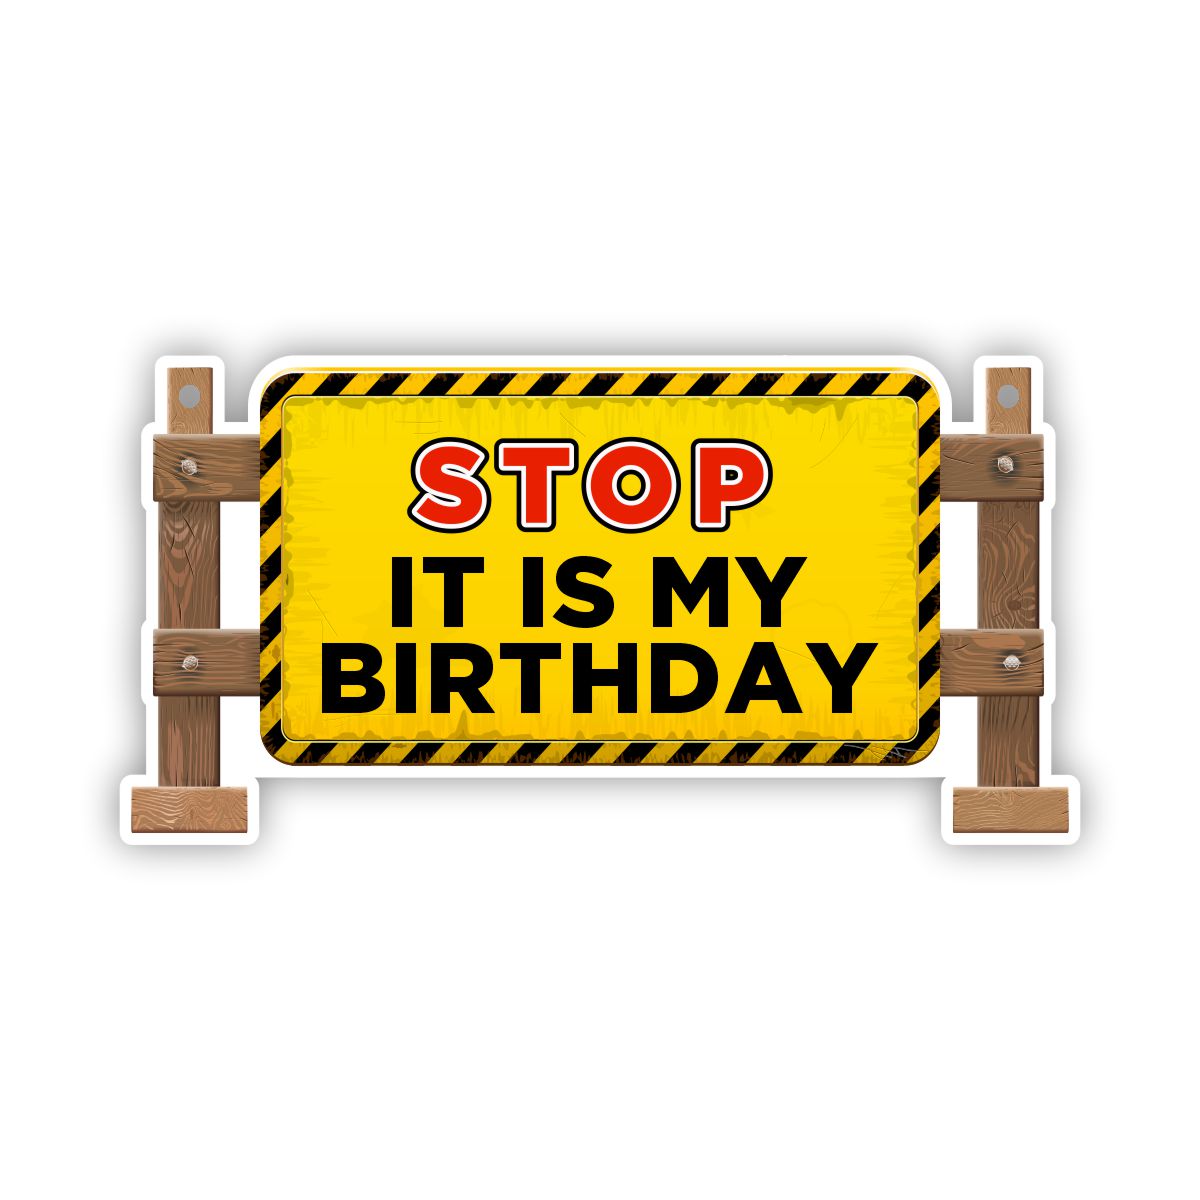 My　SignWay　Yard　Stop　Is　Letters　Birthday　Quick-Flash　Construction　It